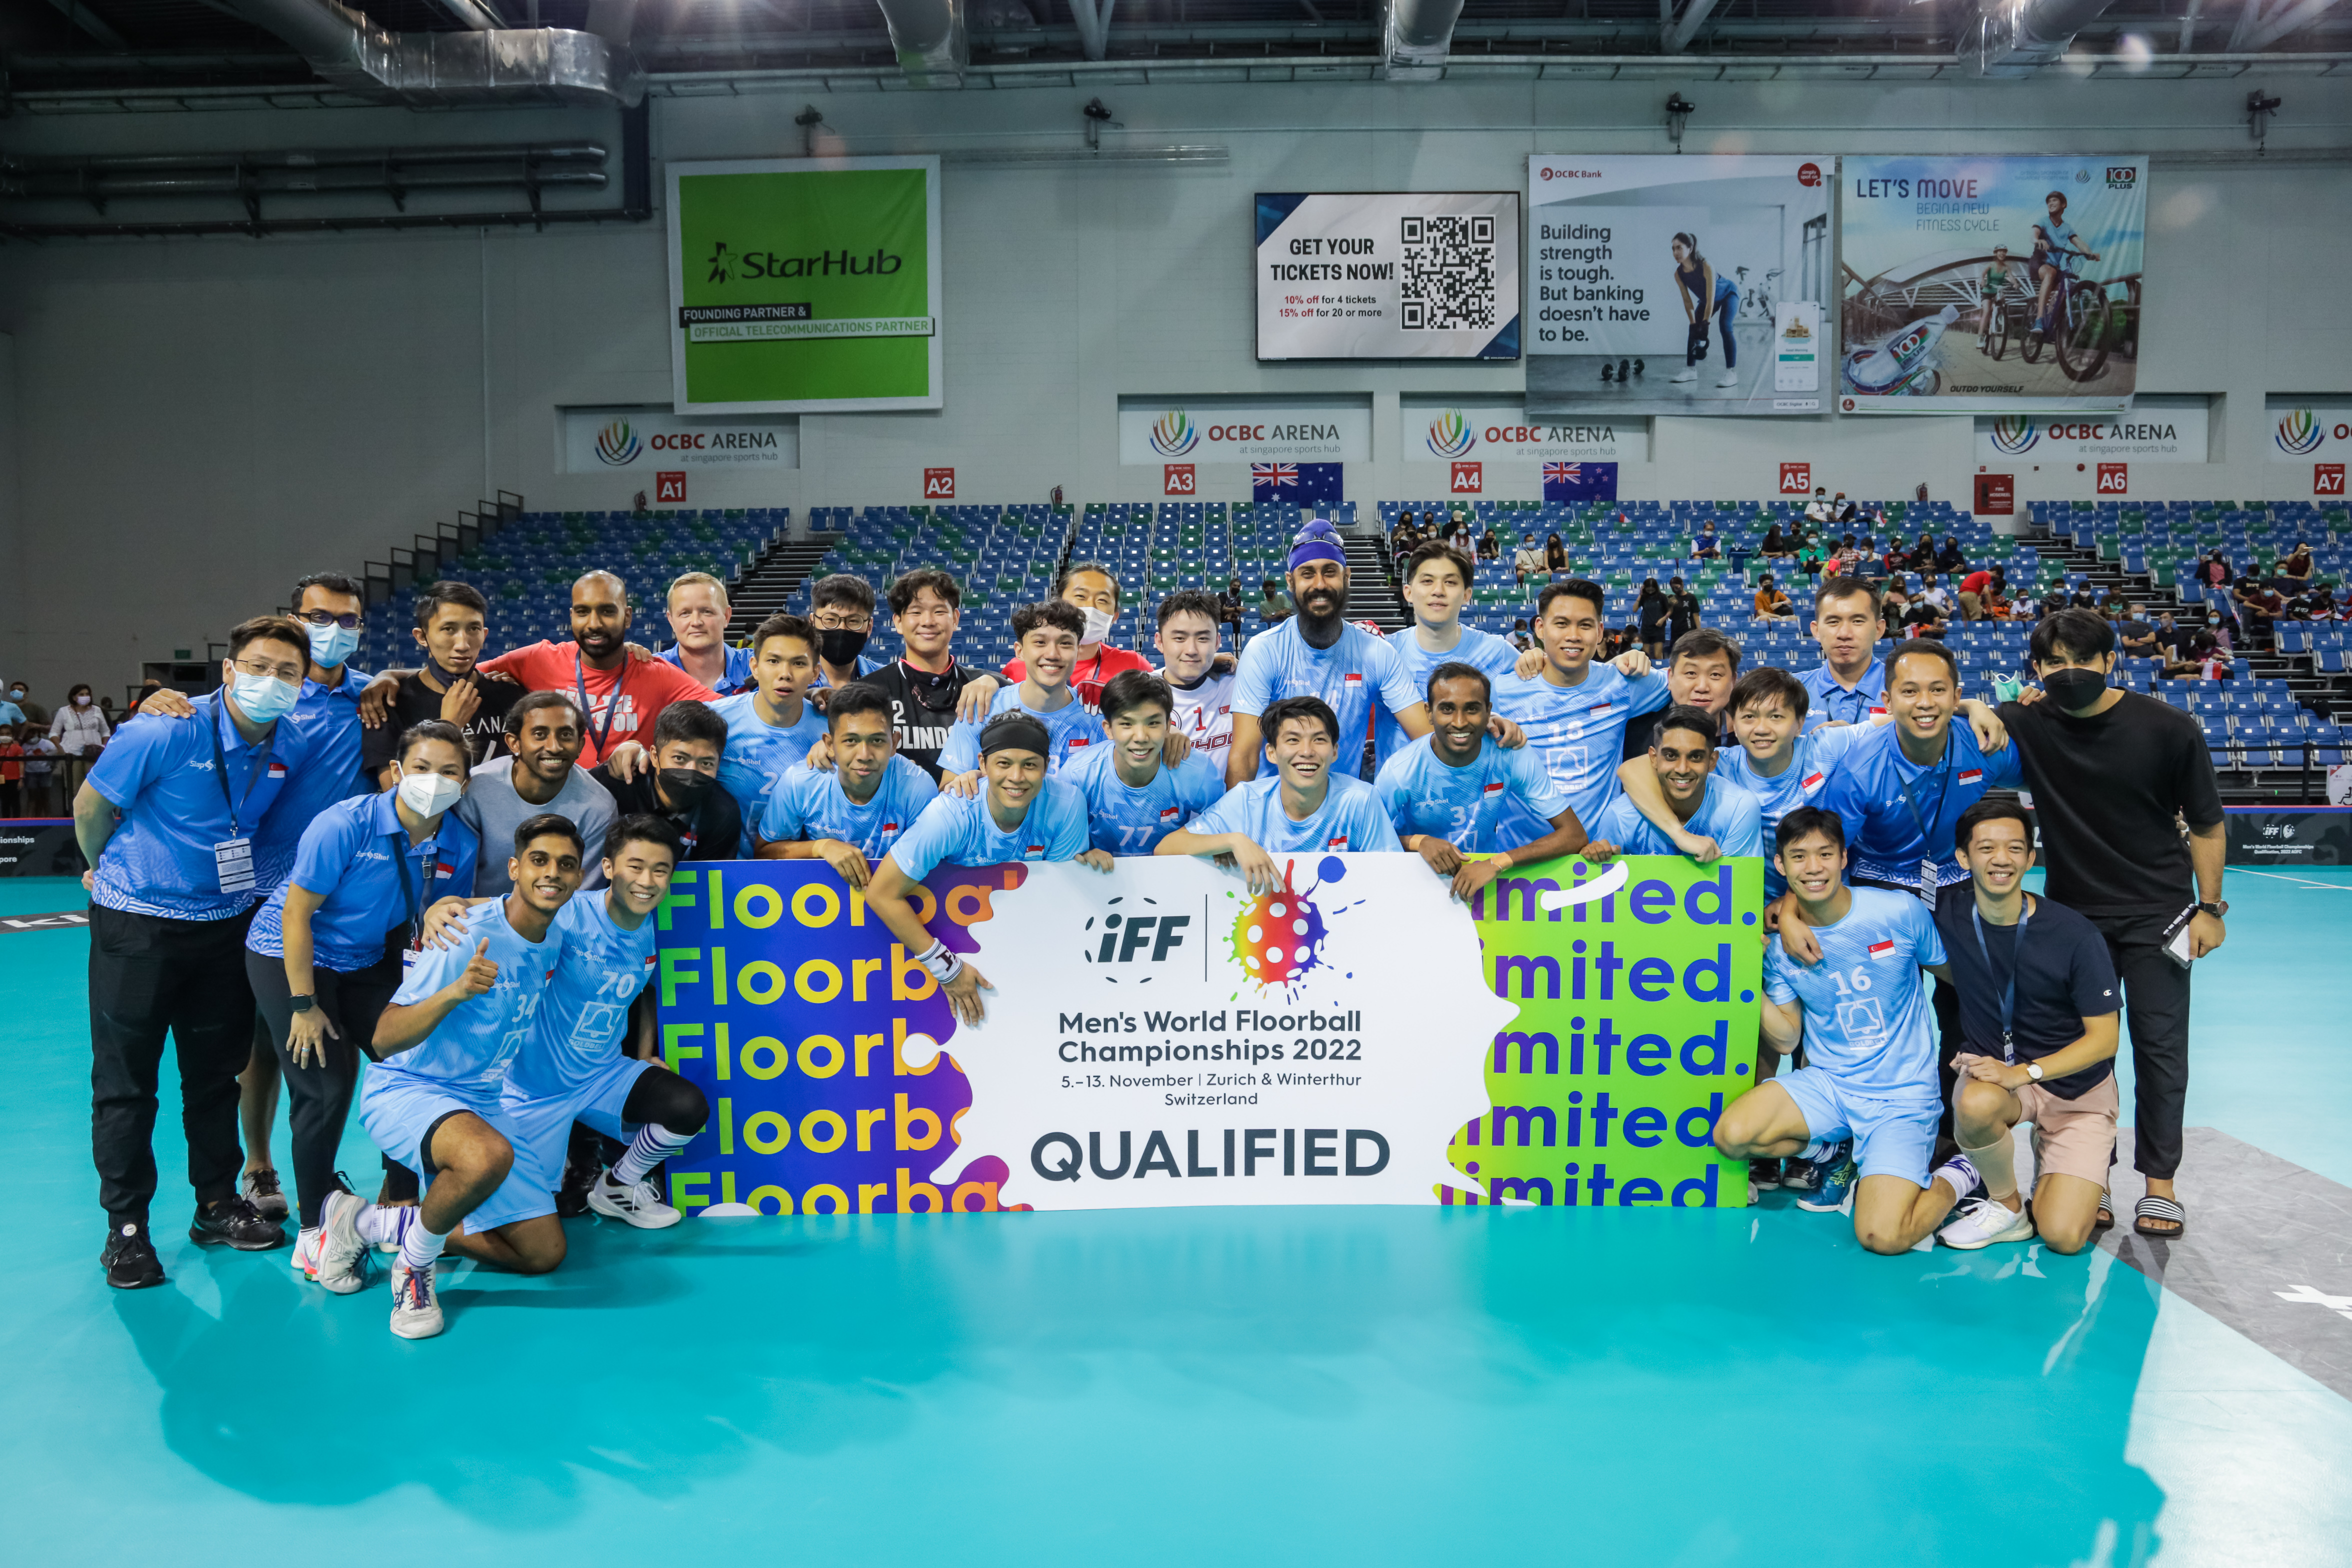 TeamSG defeats Korea to book a place in IFF Men's World Floorball Championships 2022!